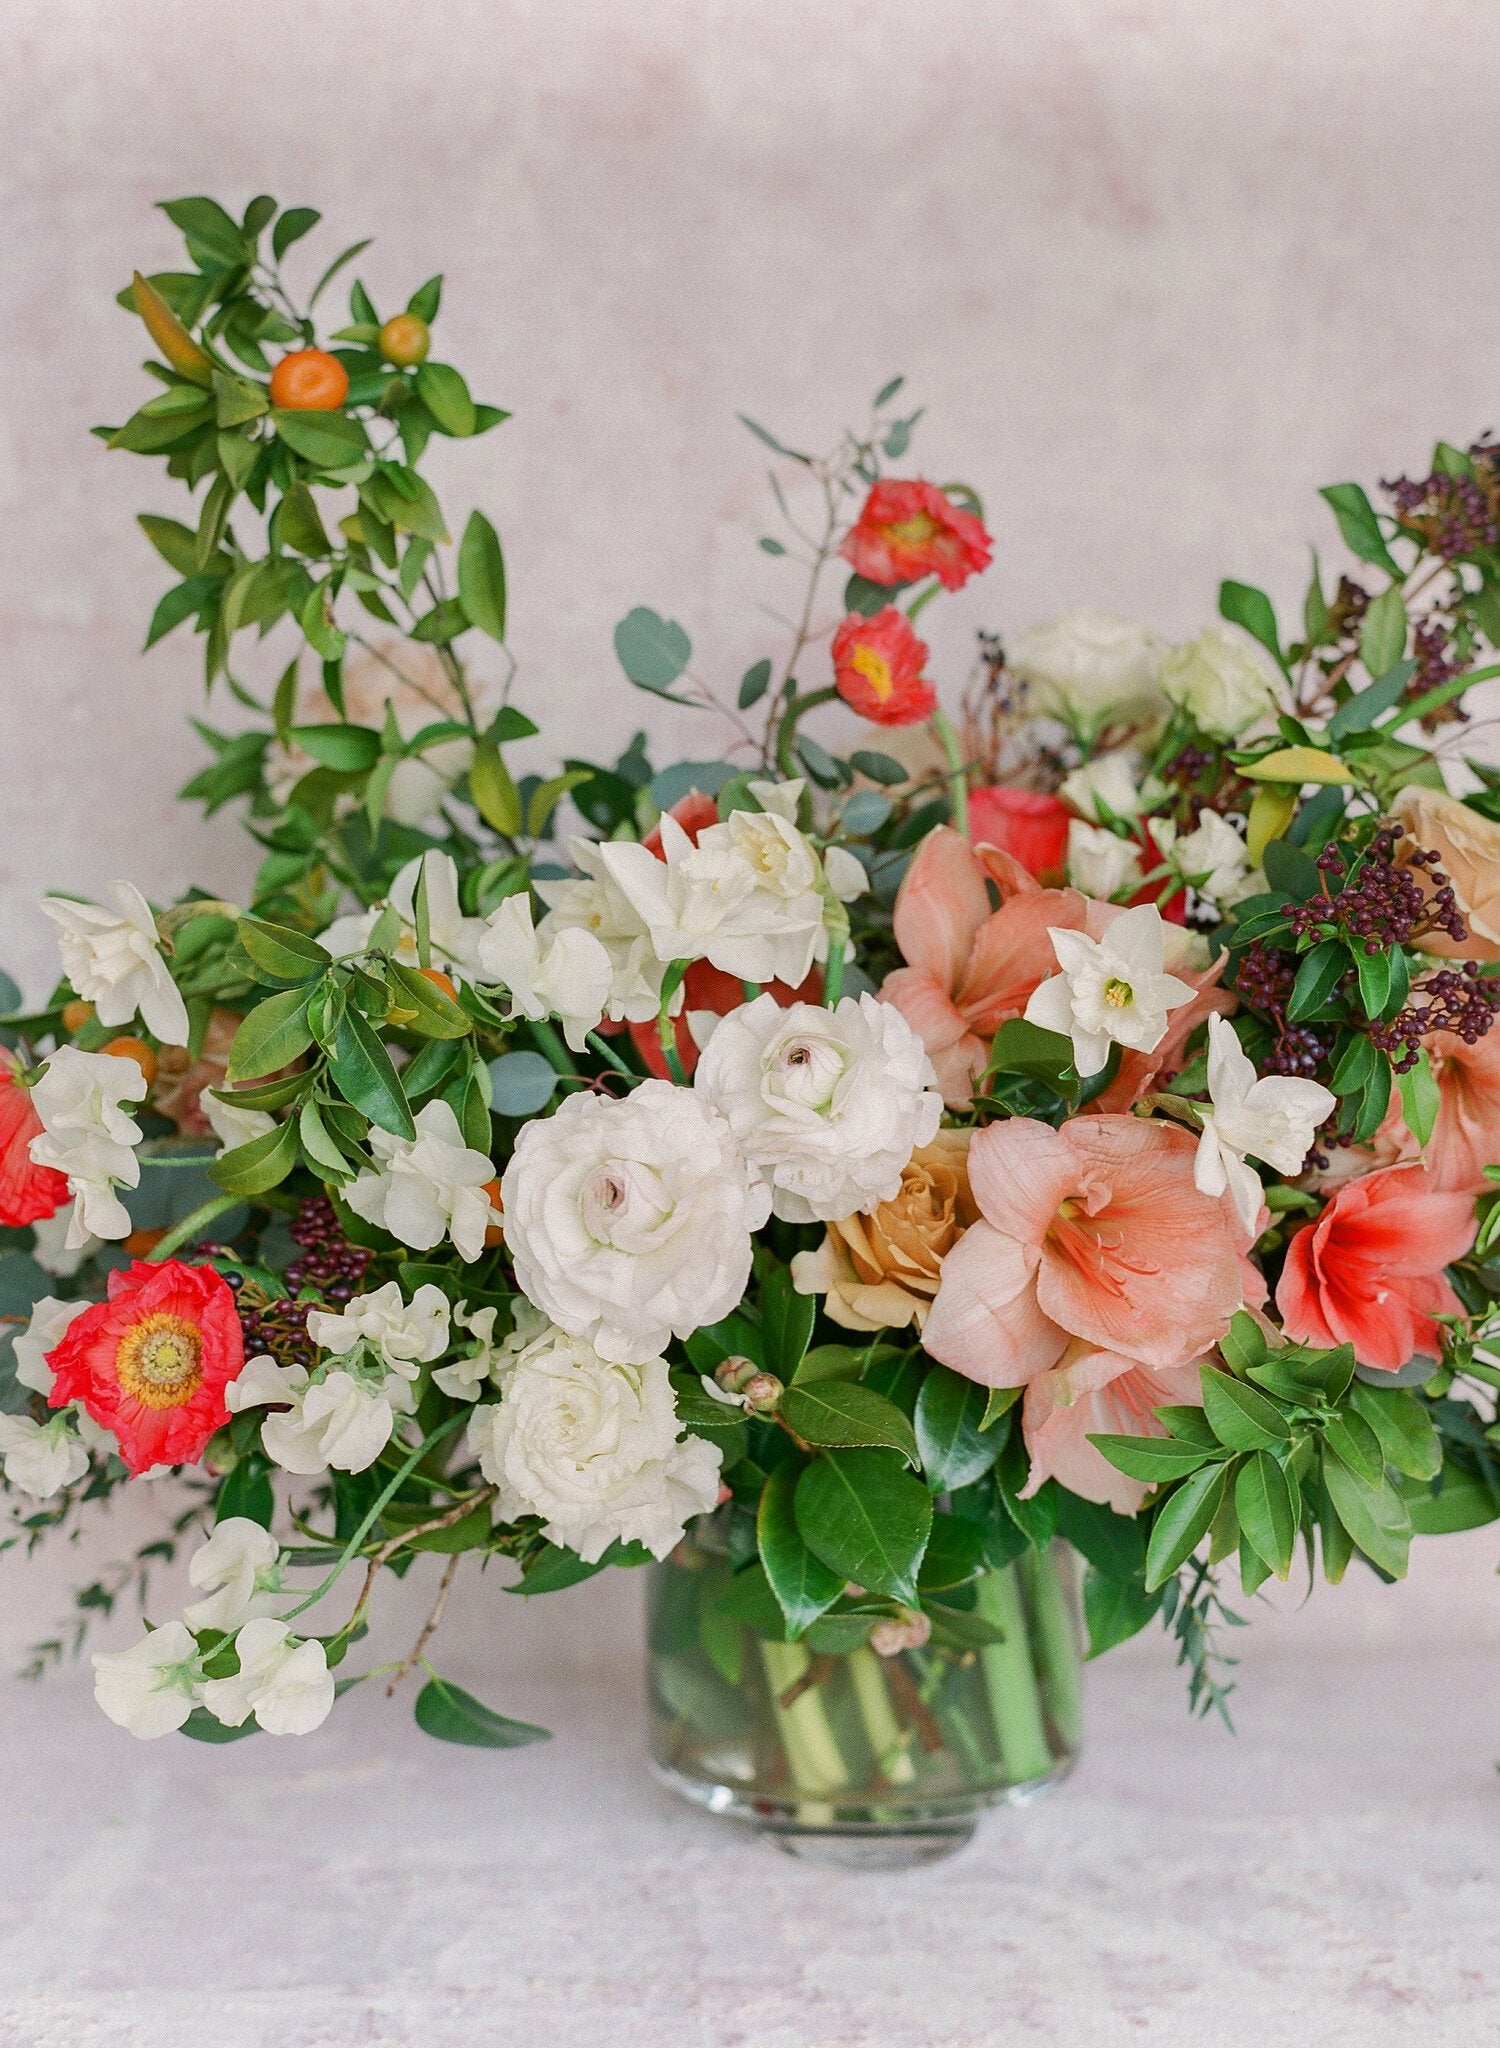 Large seasonal bouquet with red, white, pink flowers and greenery.